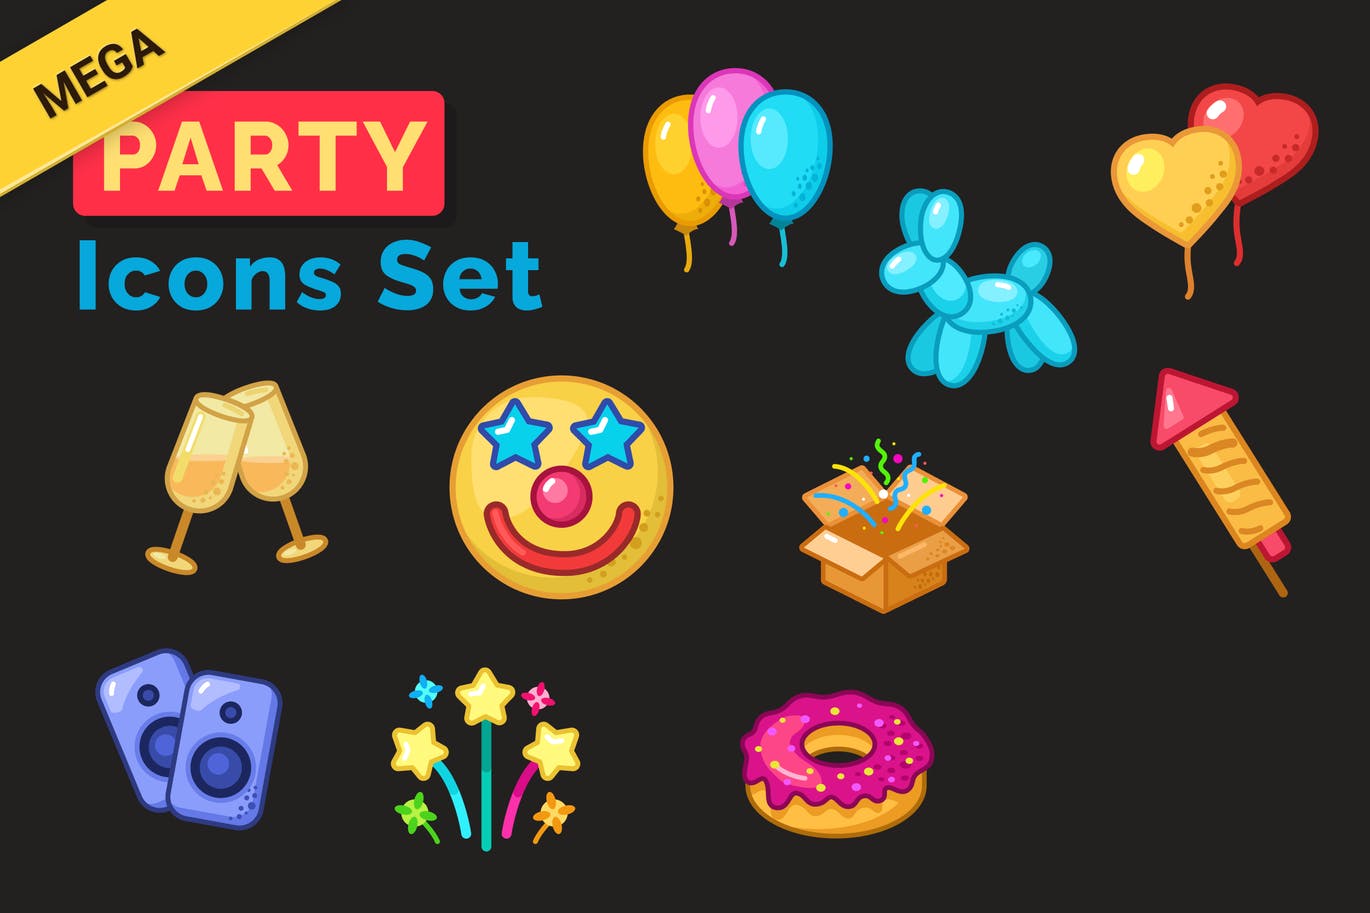 A huge set of party icons